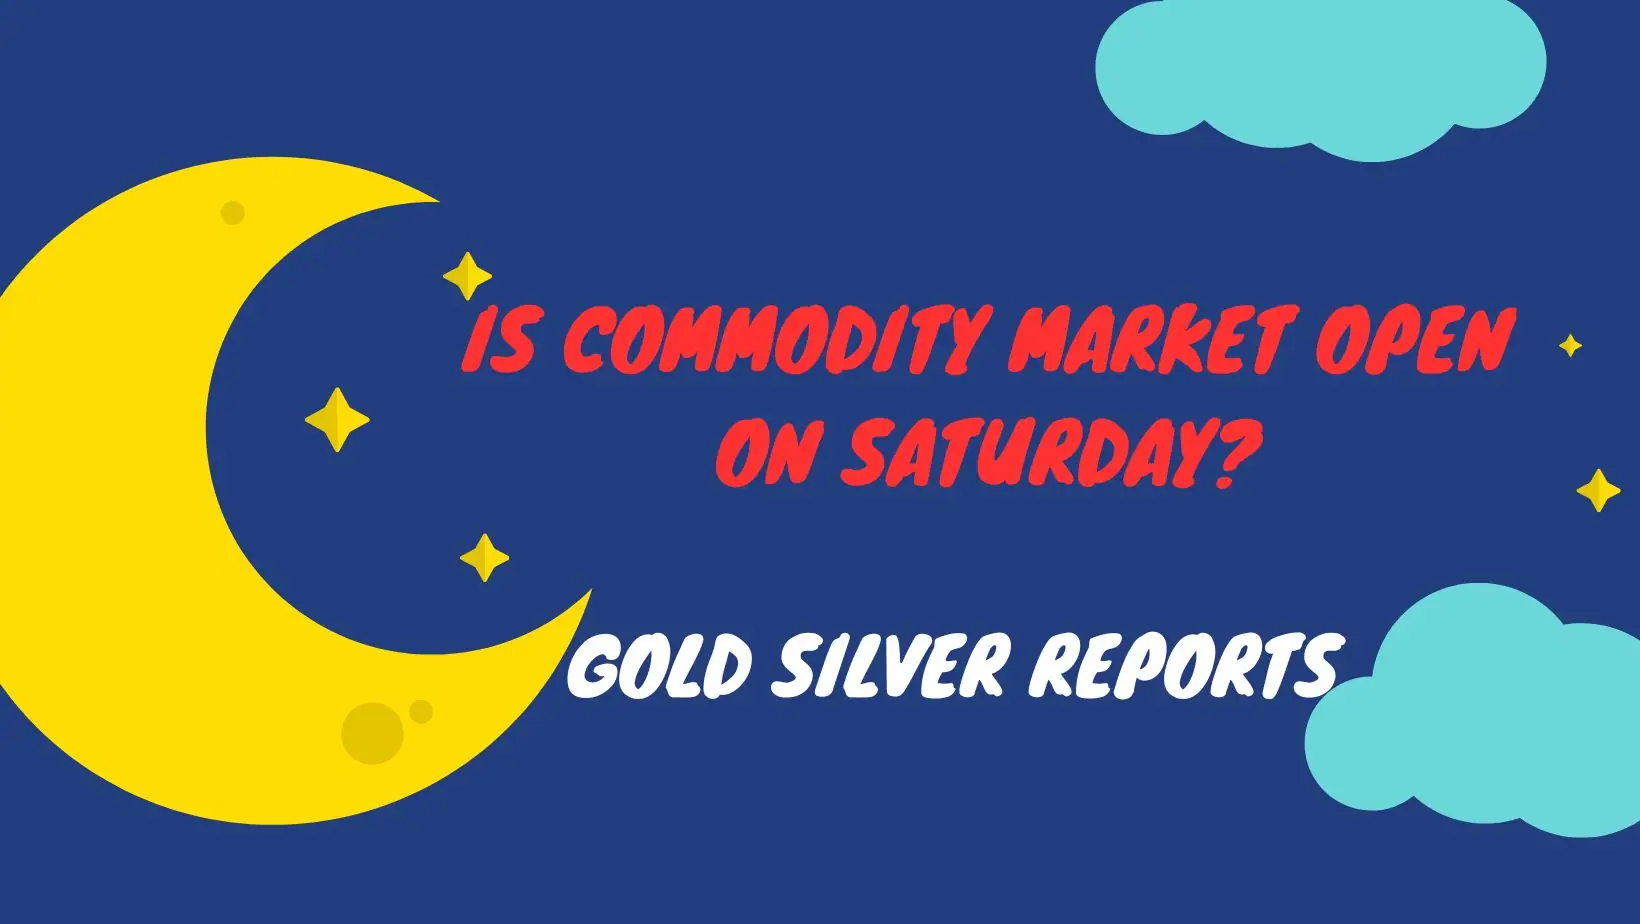 Is commodity market open on saturday?